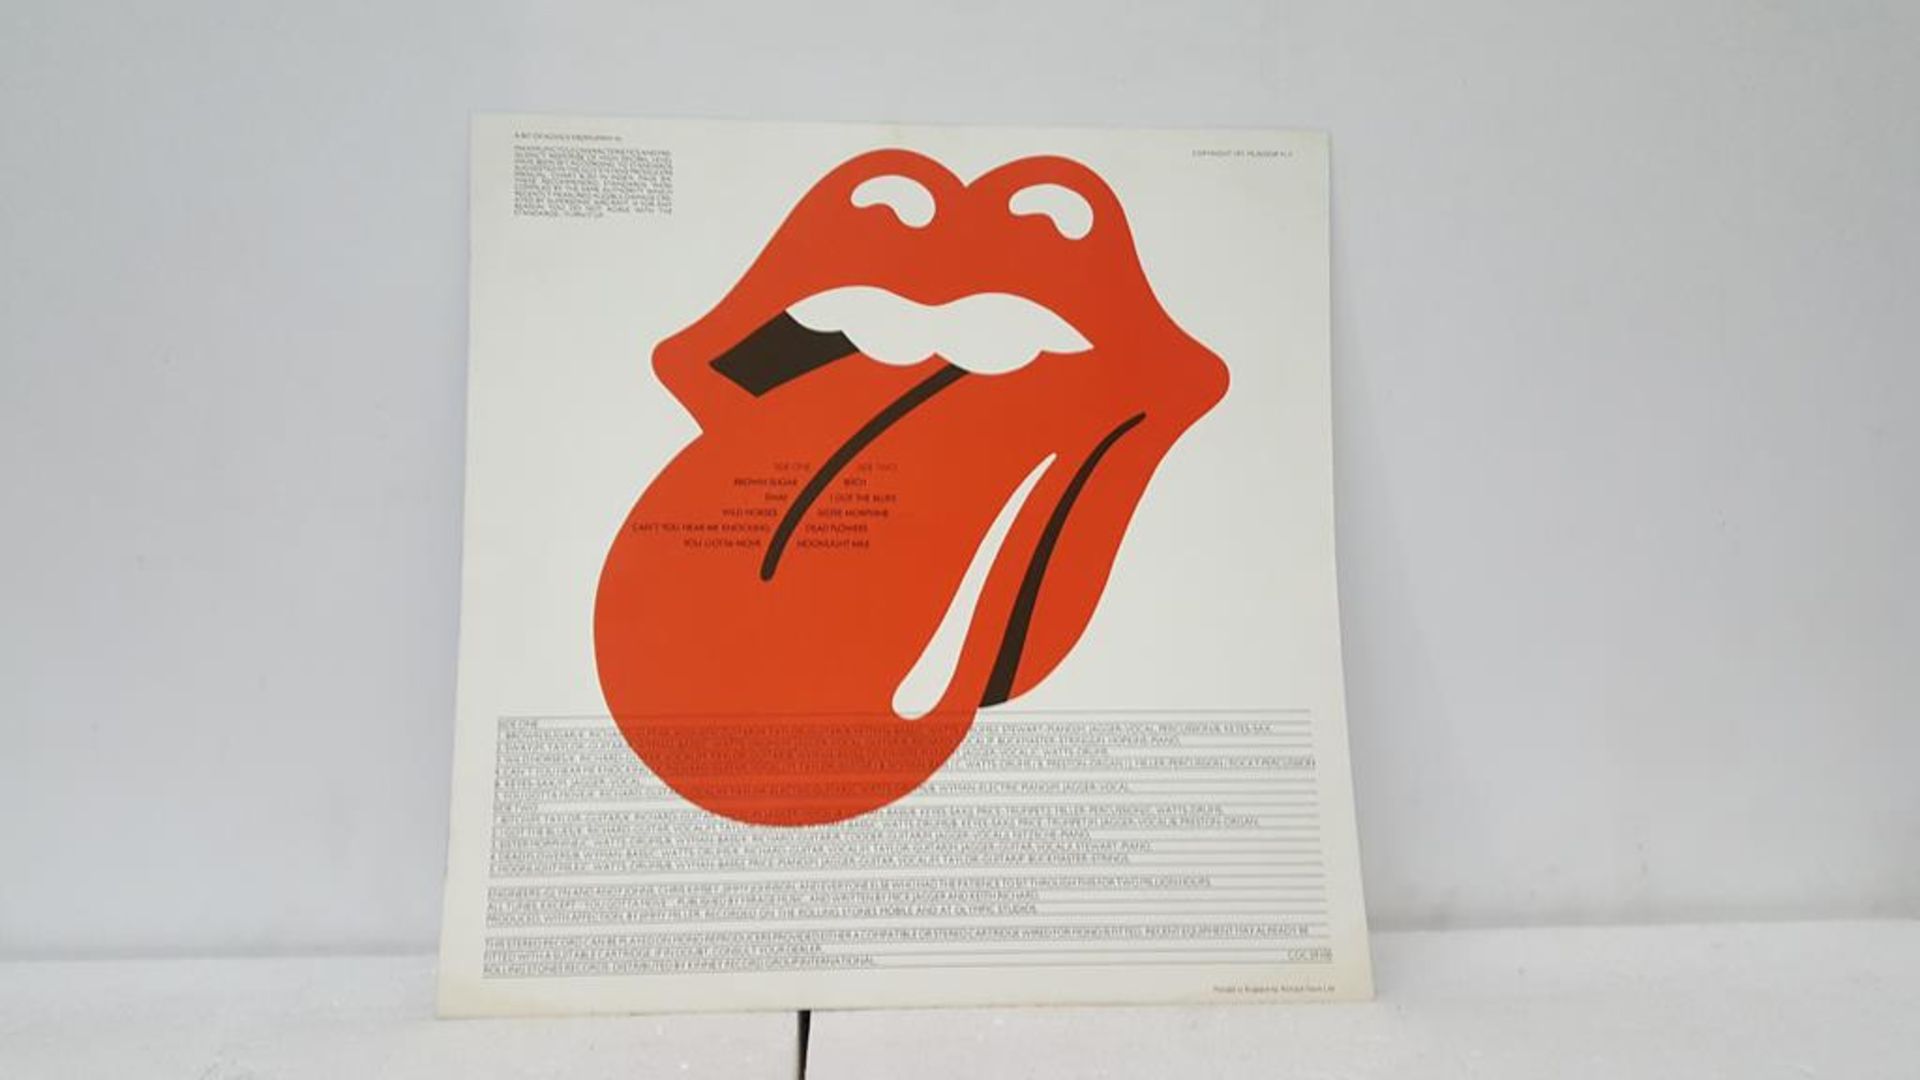 The Rolling Stones 'Sticky Fingers' LP - Image 6 of 6